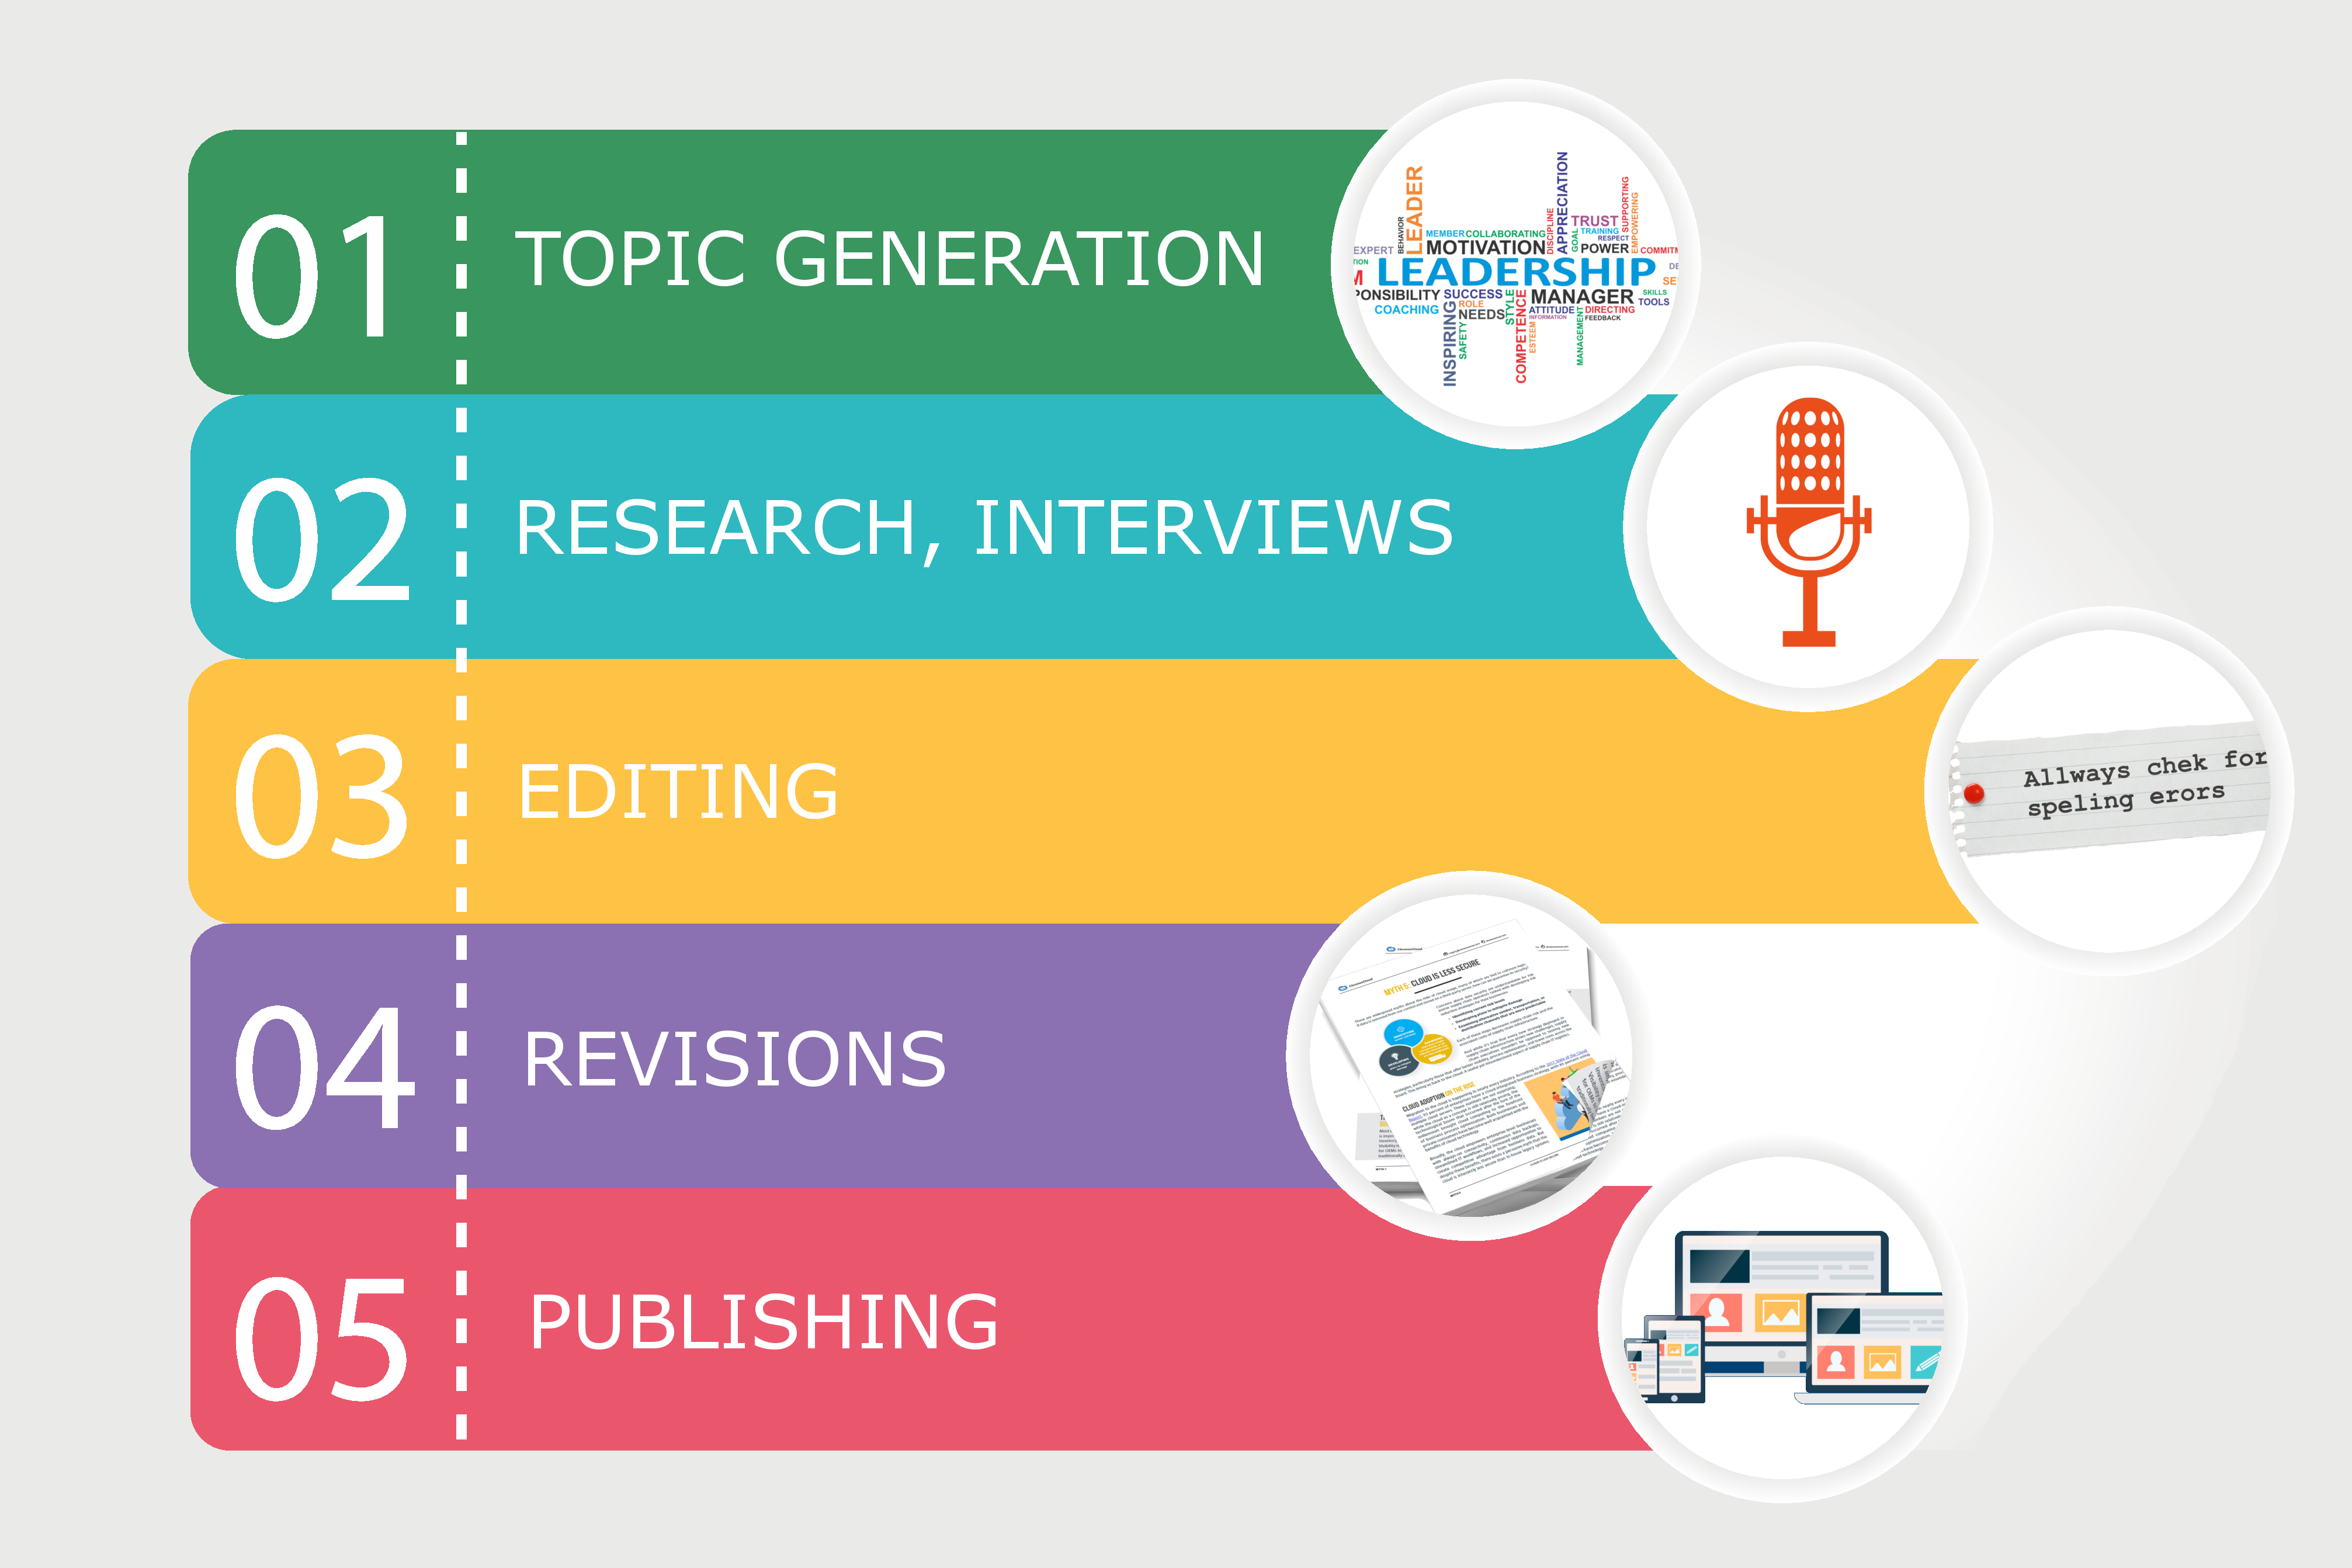 The white-label blogging process involves numerous steps, from topic generation to final publication.